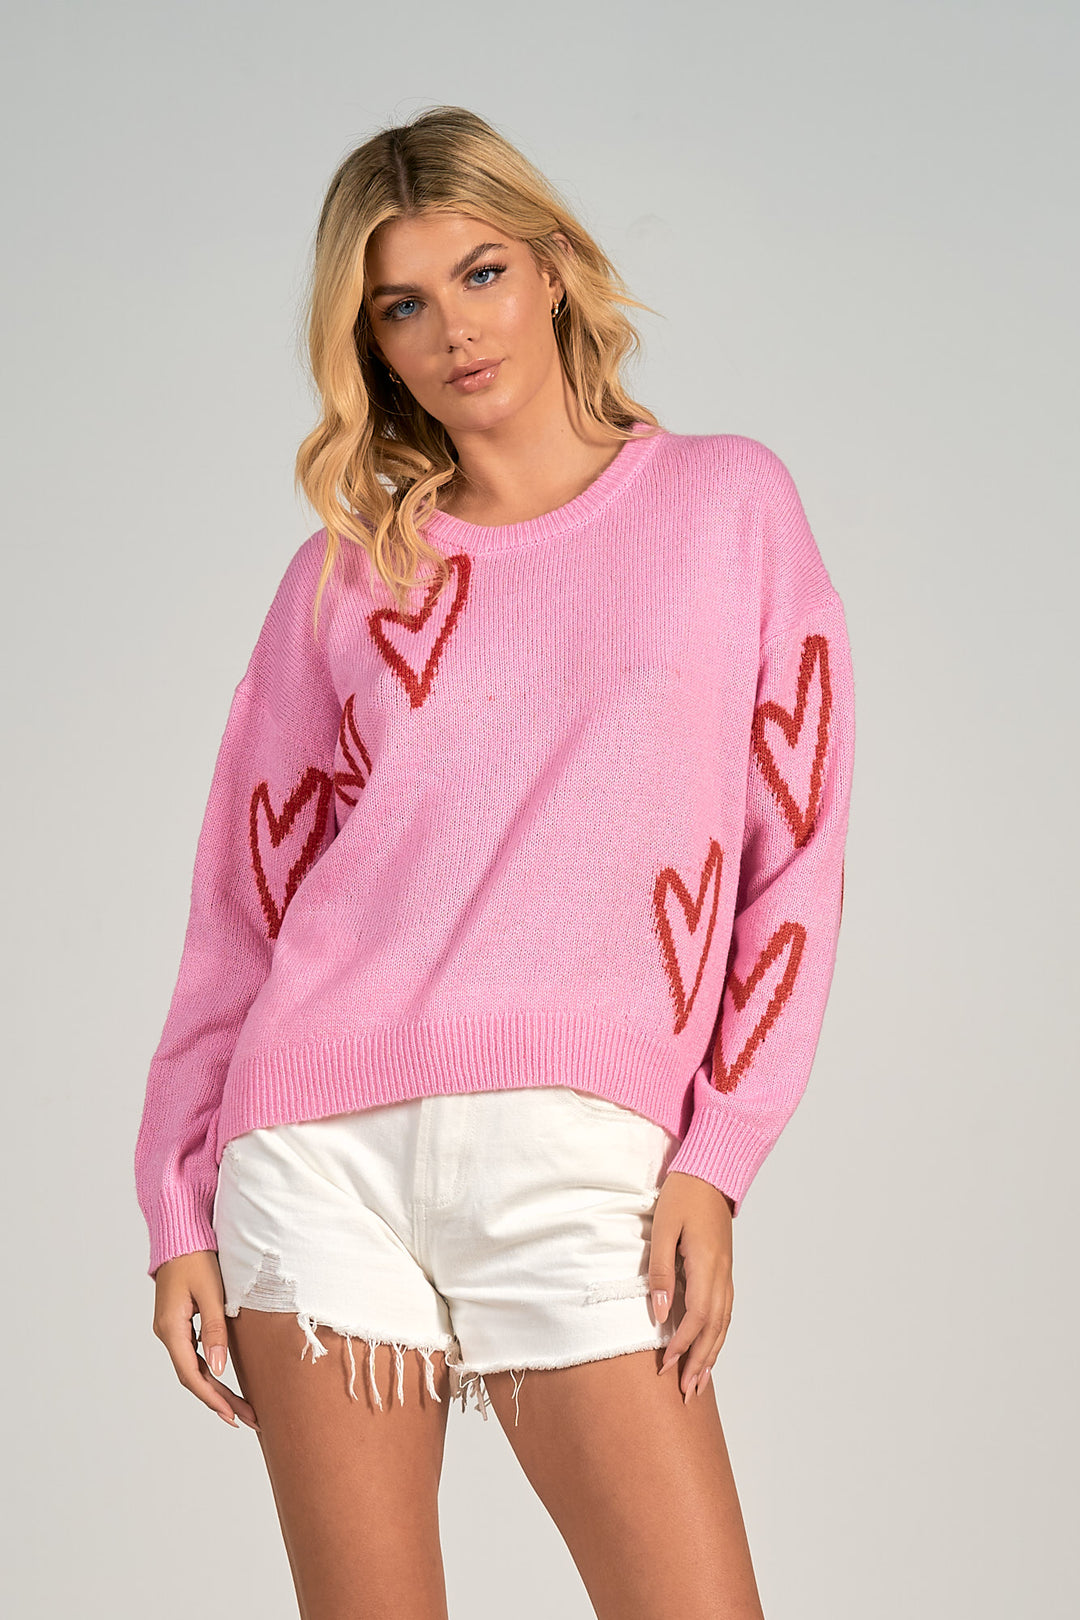 CREWNECK HEART SWEATER - PINK HEART - Kingfisher Road - Online Boutique